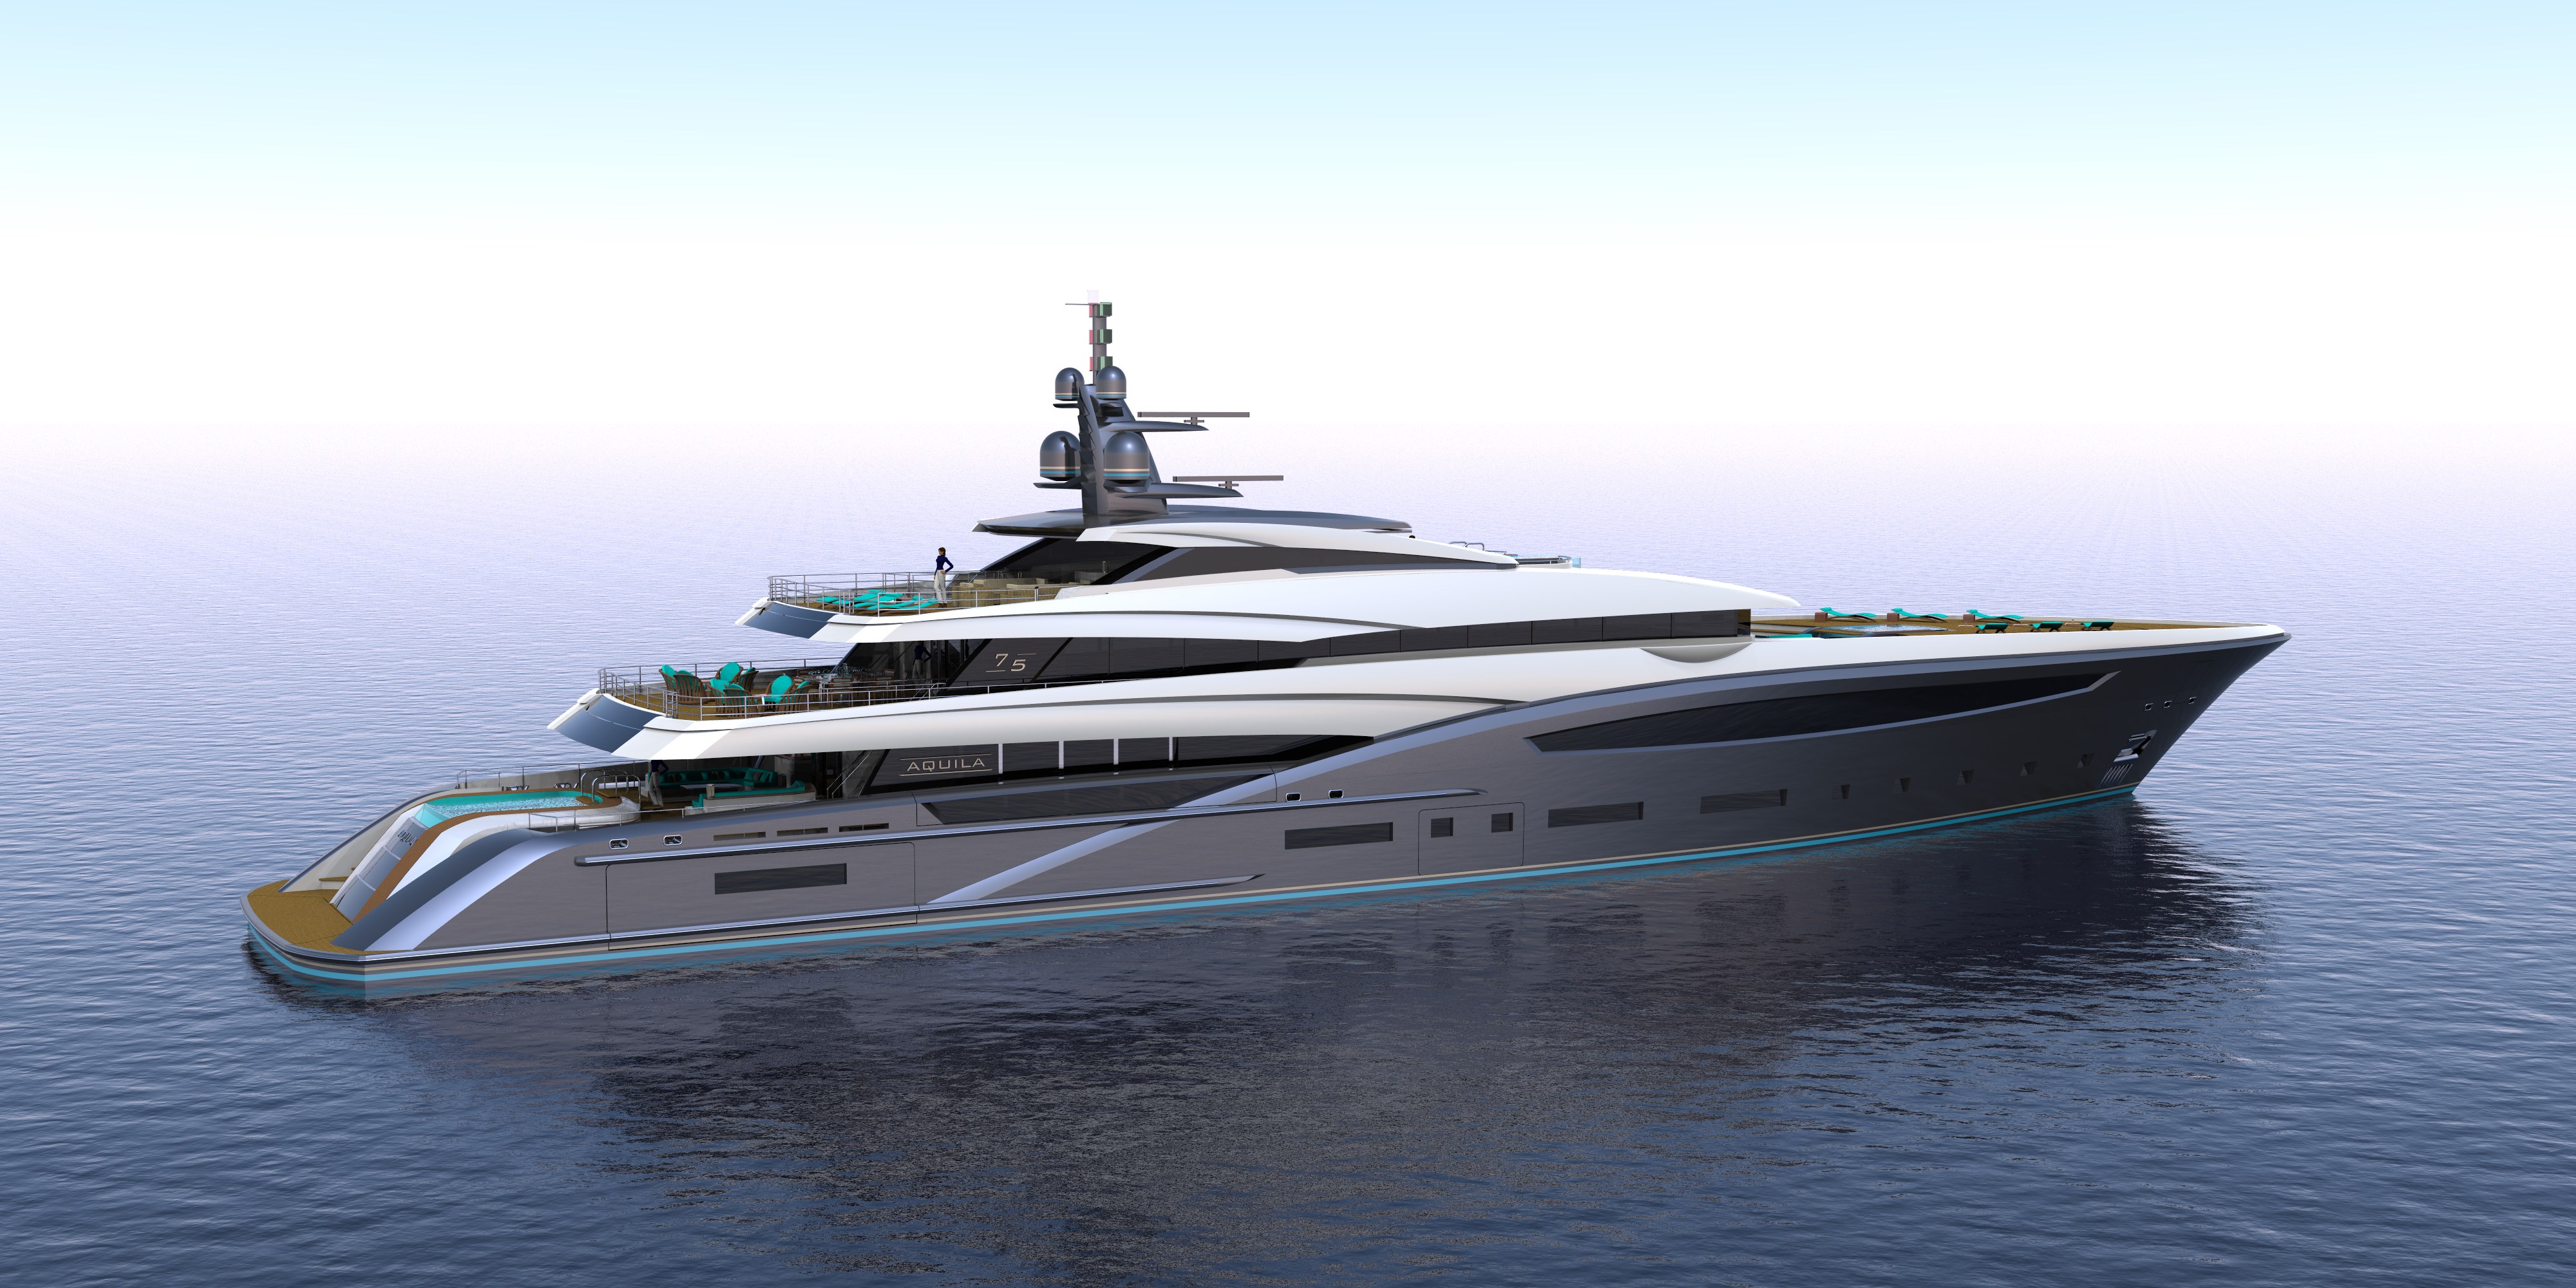 CUSTOM YACHT 75M charter specs and number of guests